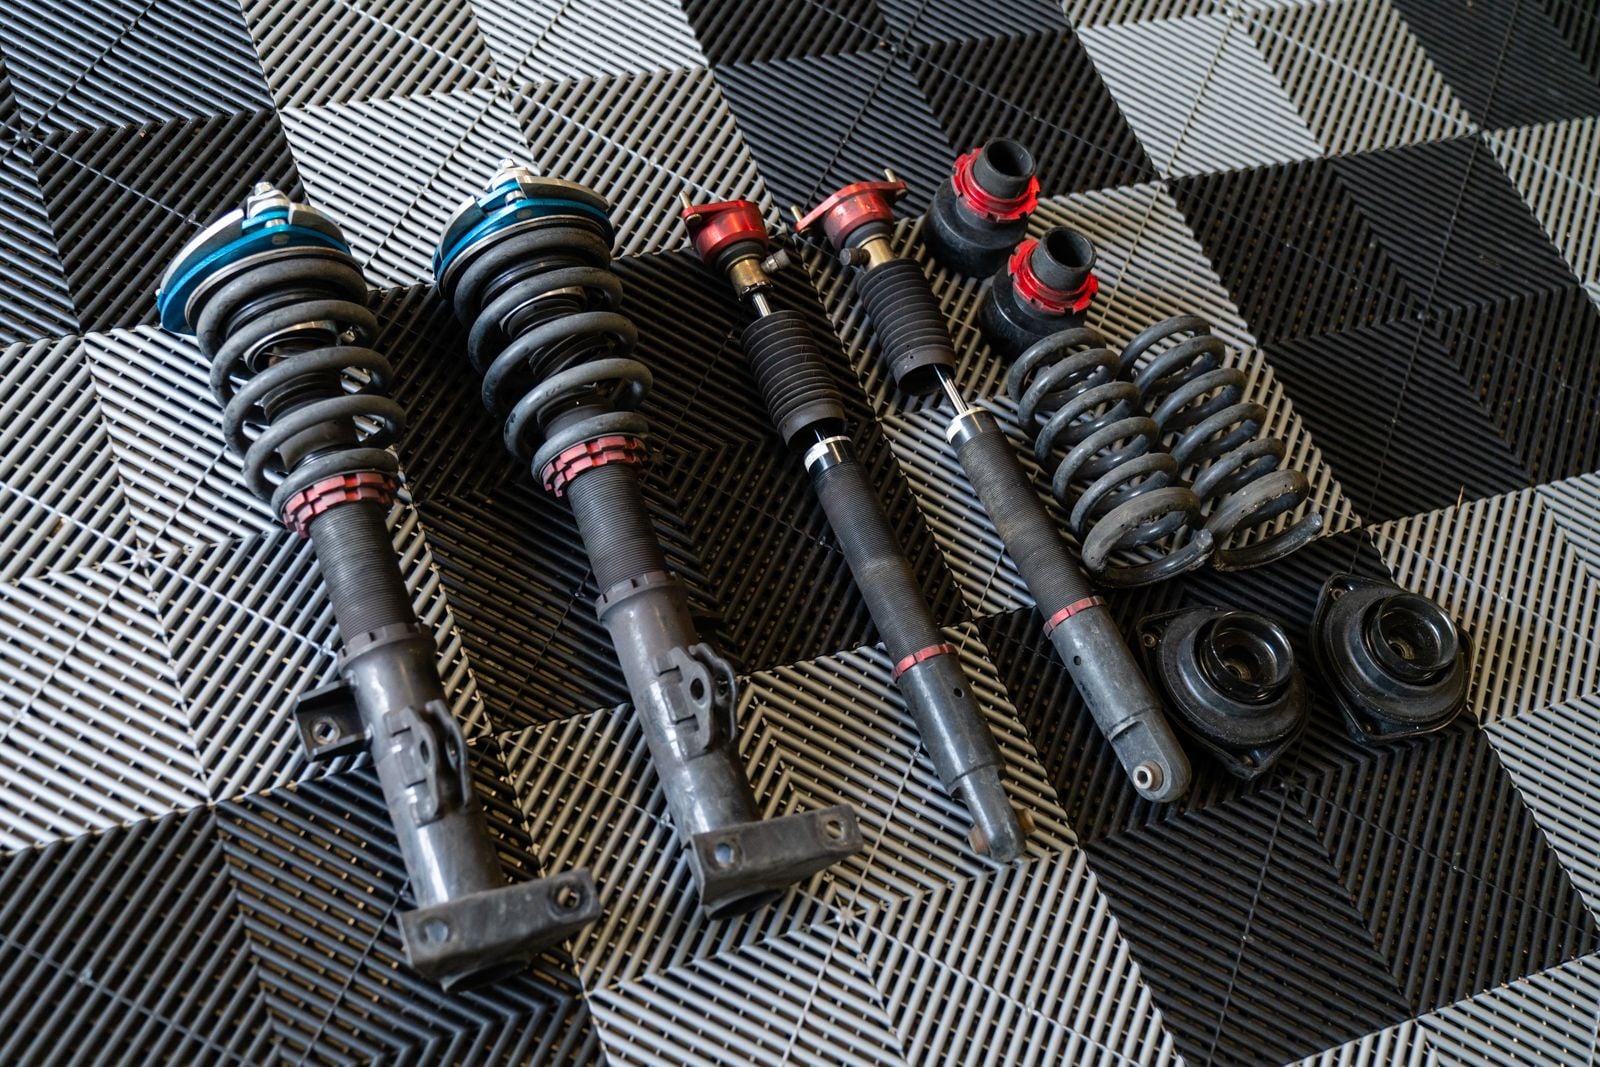 Steering/Suspension - w204 C63 K-Mac Camber Plates + free BC Racing Coilovers - Used - 2008 to 2014 Mercedes-Benz C63 AMG - Mission Viejo, CA 92691, United States